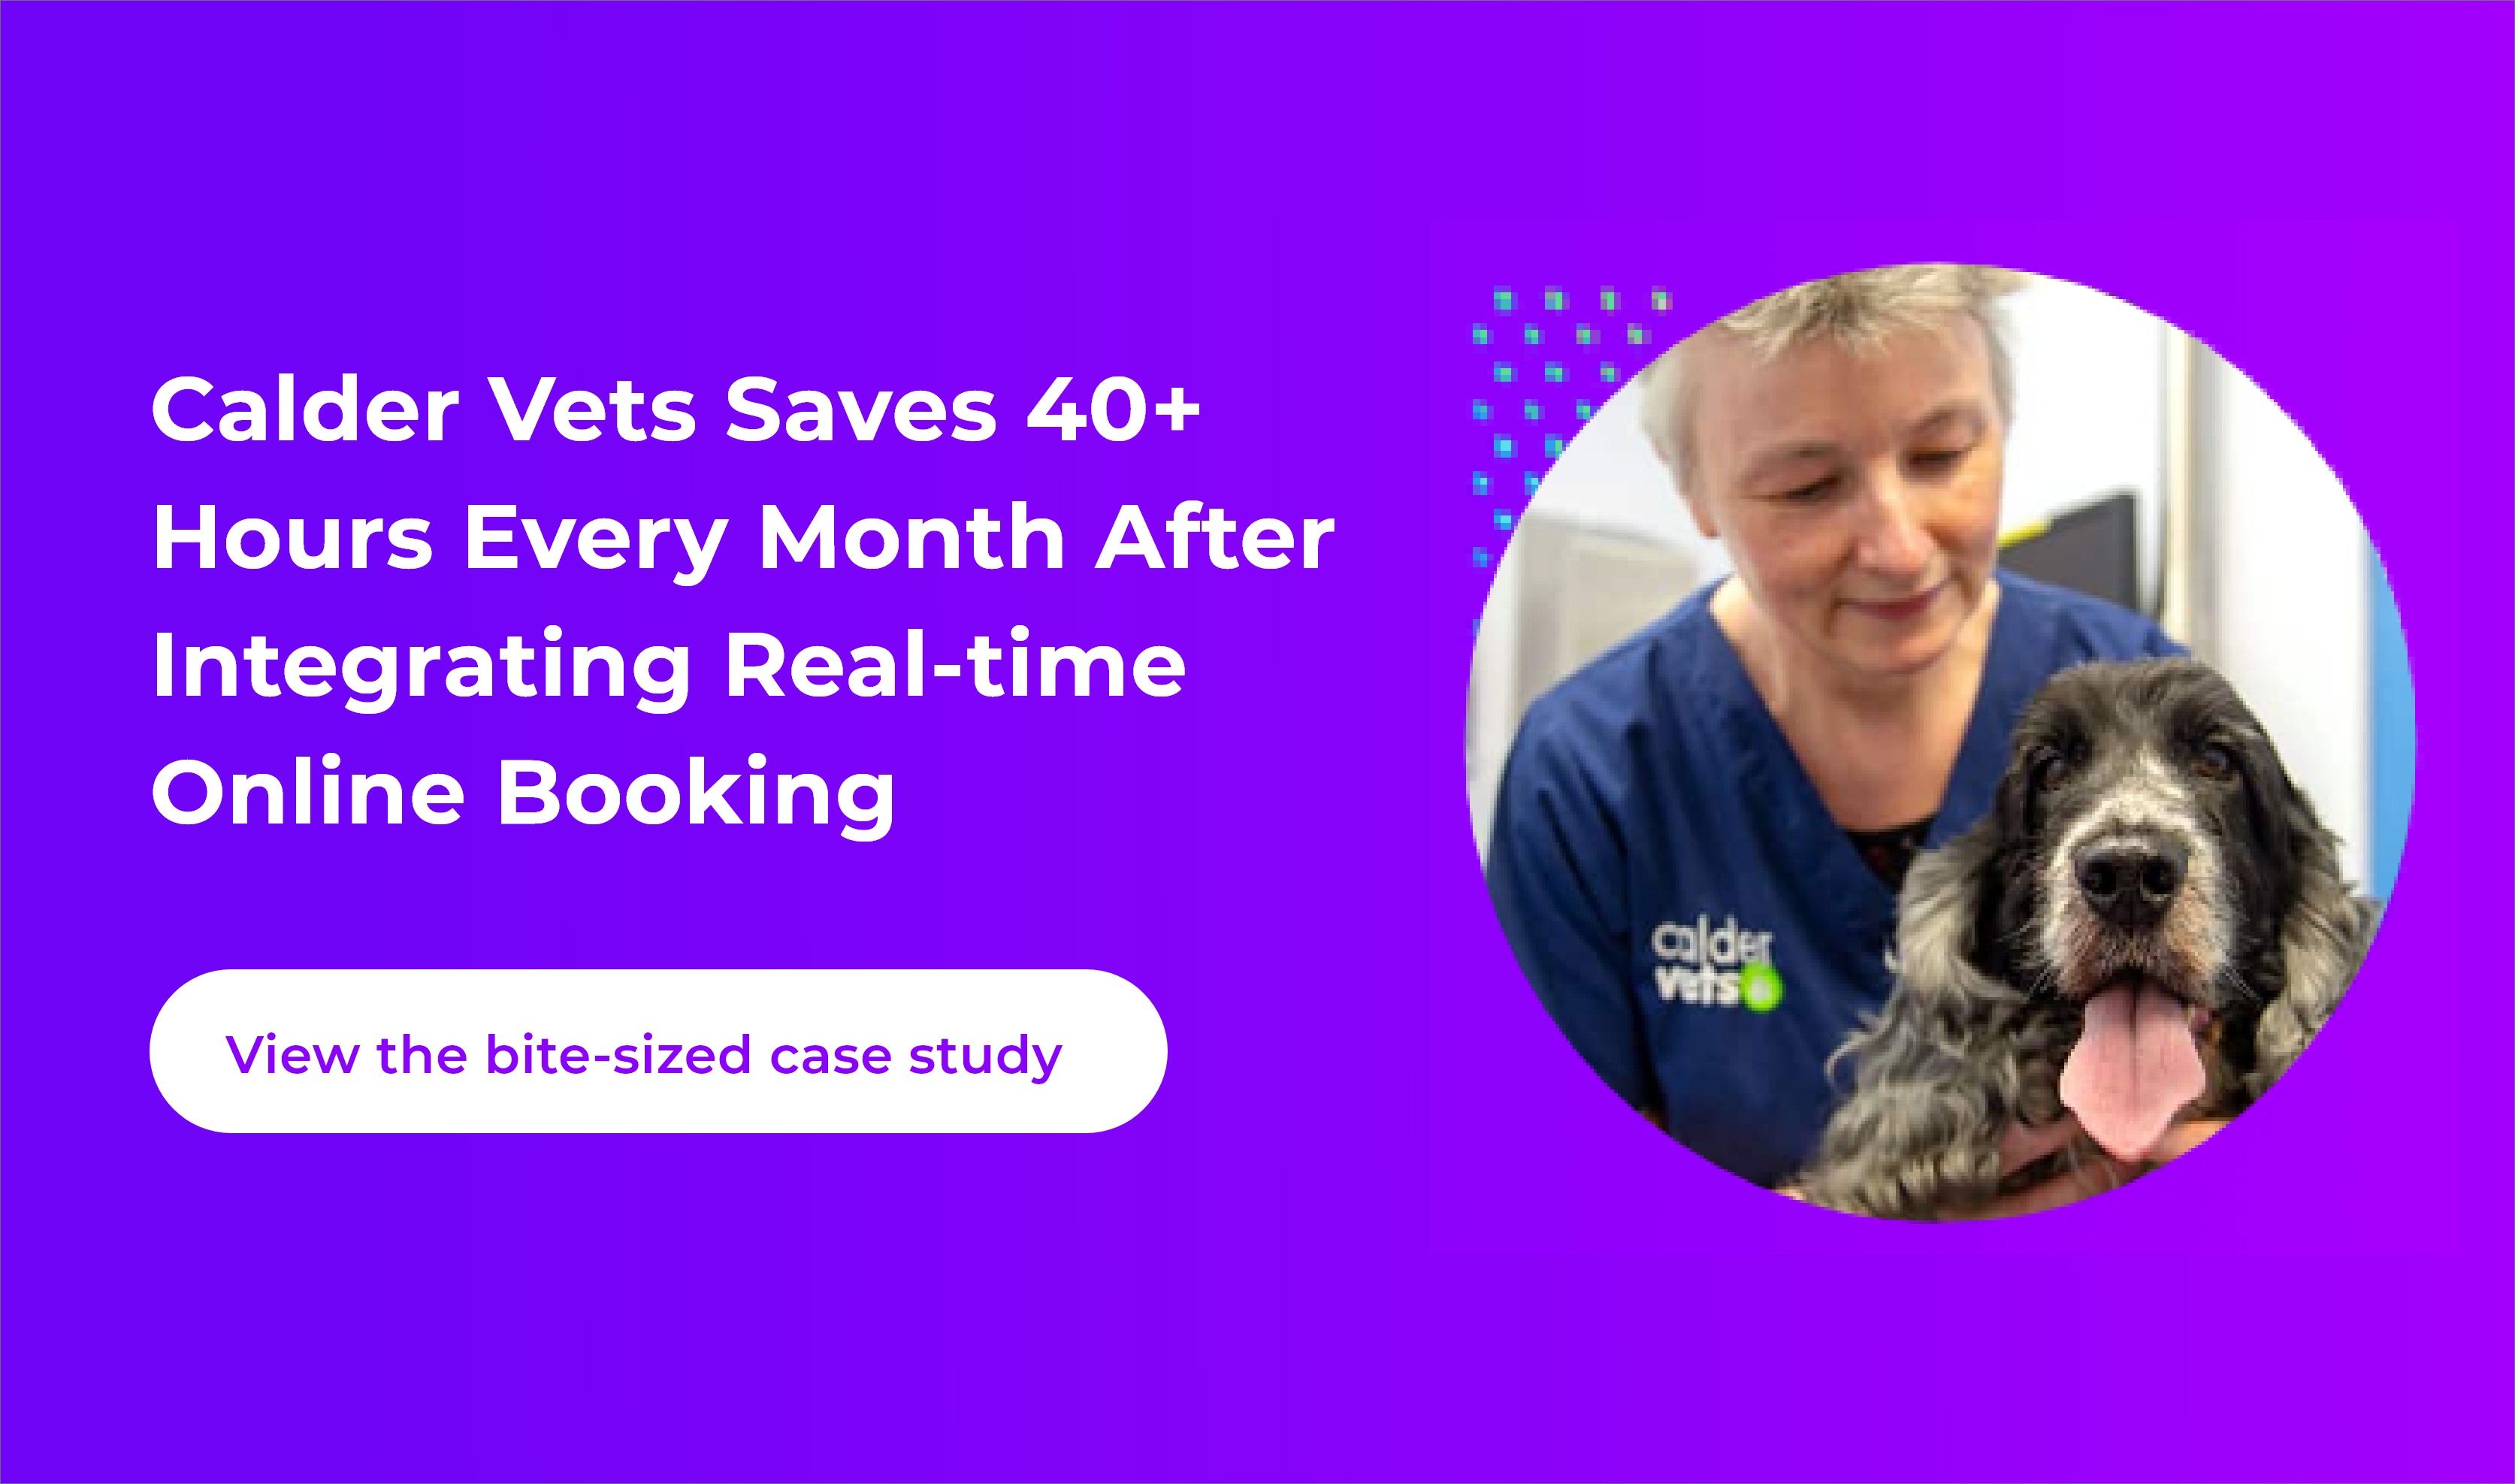 Calder Vets Saves 40 Hours Every Month After Integrating Real Time Online Booking